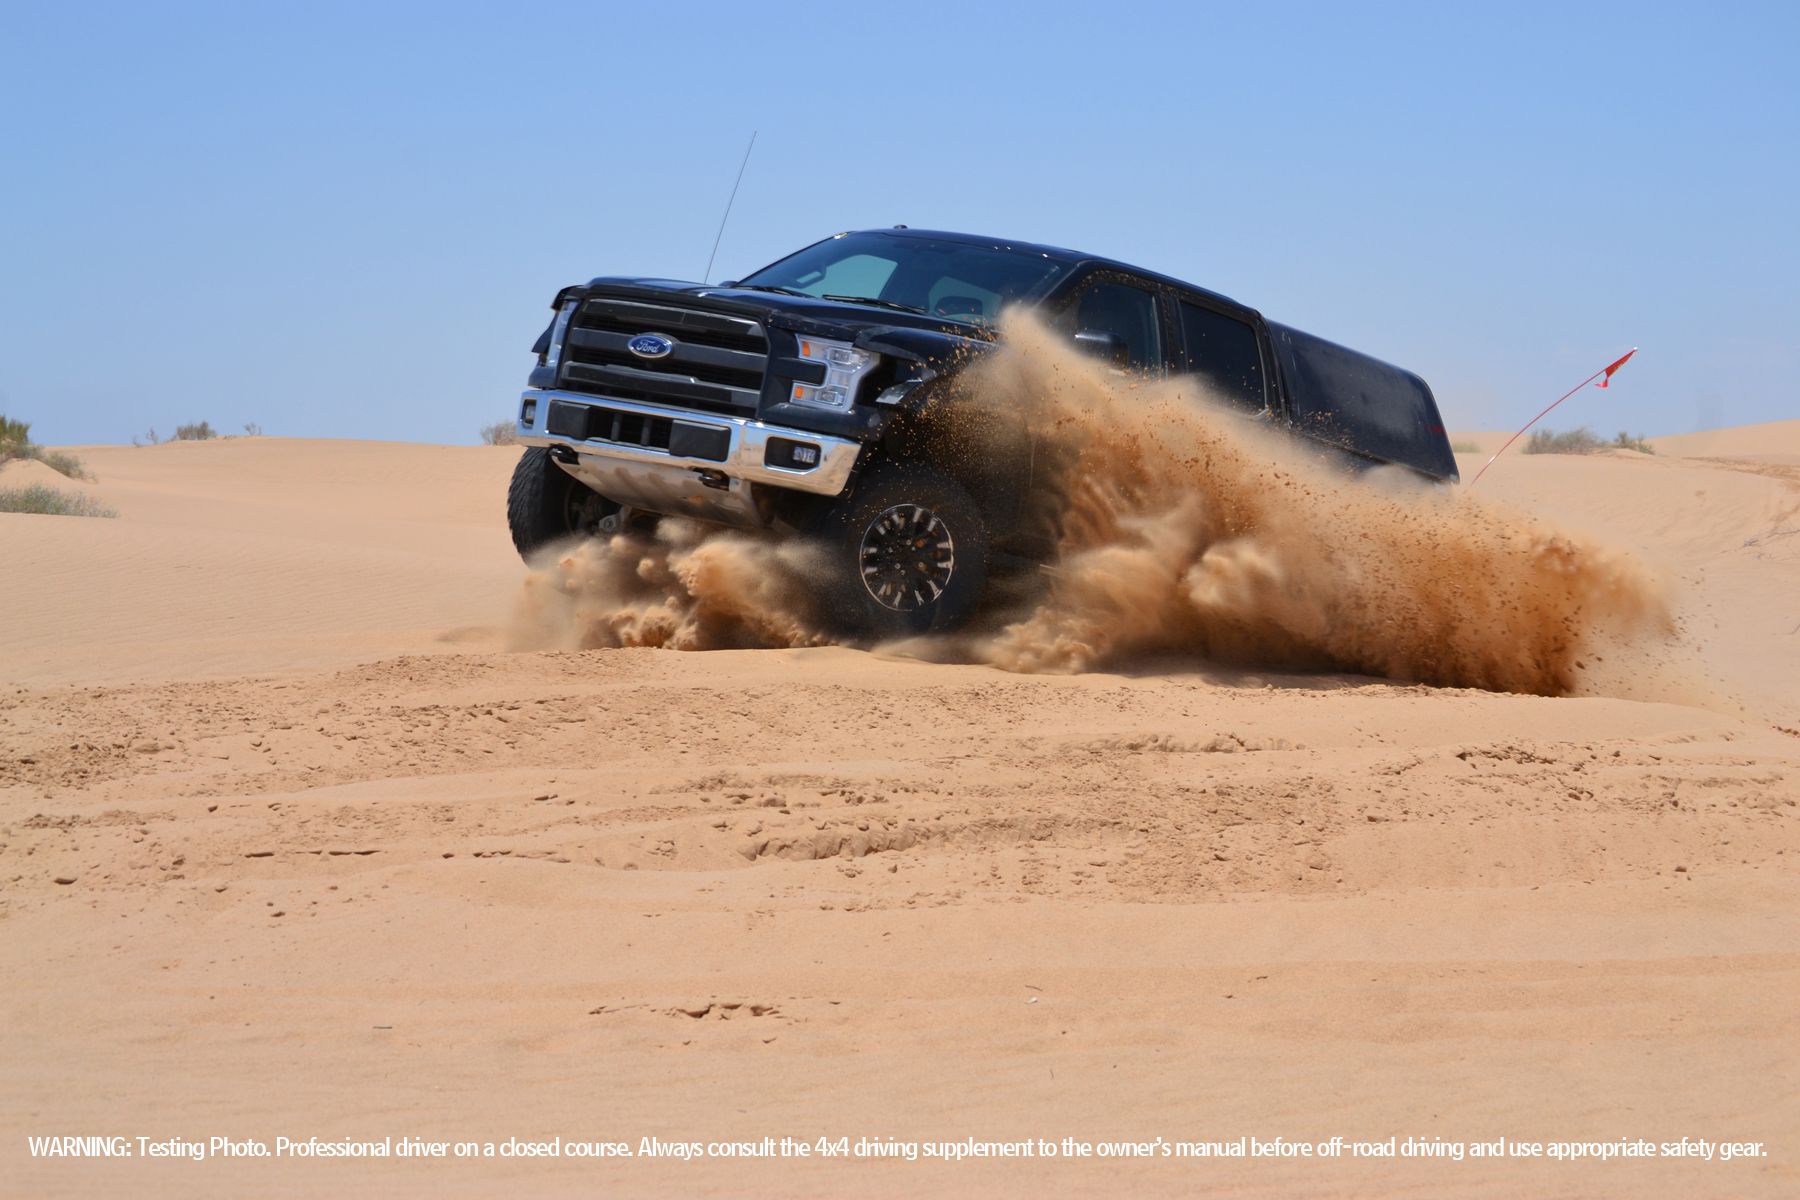 2015 Ford Releases Drone Footage of 2017 Raptor Blasting Over Sand Dunes